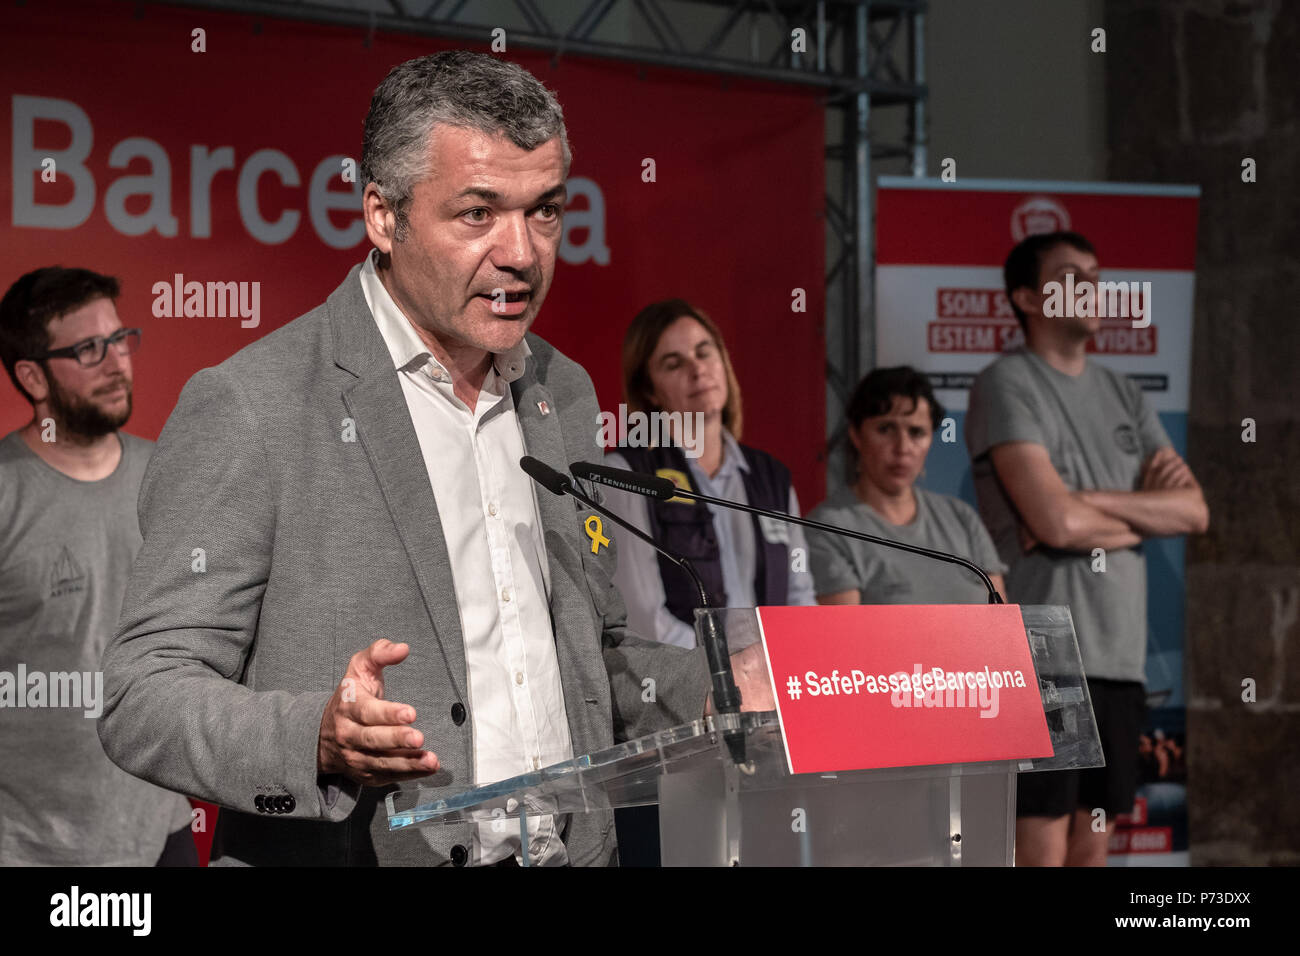 Oriol Amorós is seen during his speech at the press conference. Following the arrival in Barcelona of the rescue vessel Open Arms, Óscar Camps, leader of ProActiva Open Arms accompanied by the Mayor of Barcelona, Ada Colau and several MEPs, attended the press in a press conference. Stock Photo